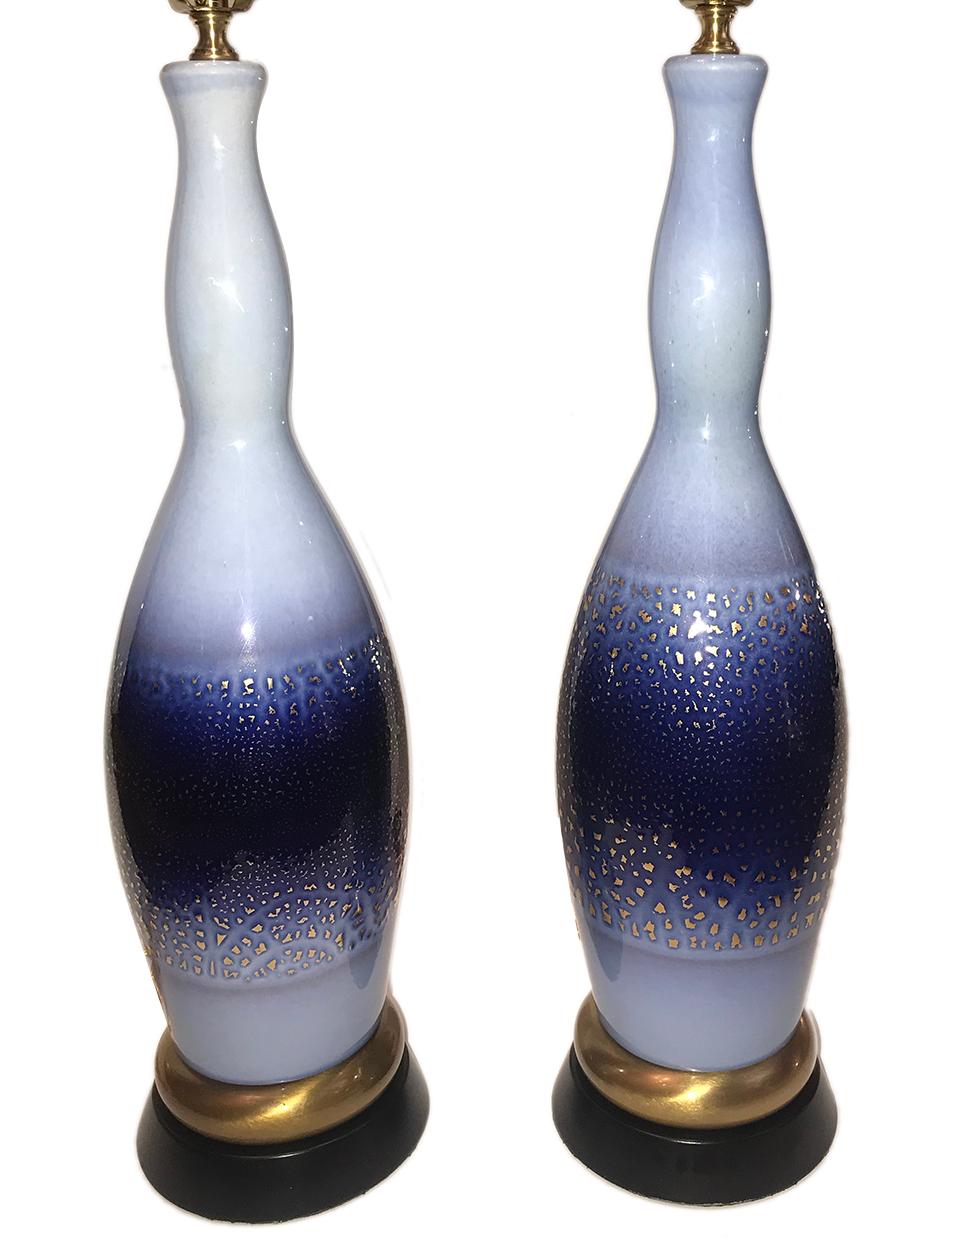 Pair of late 1940s French blue porcelain lamps with gilt details.

Measurements:
Height of body: 21.5